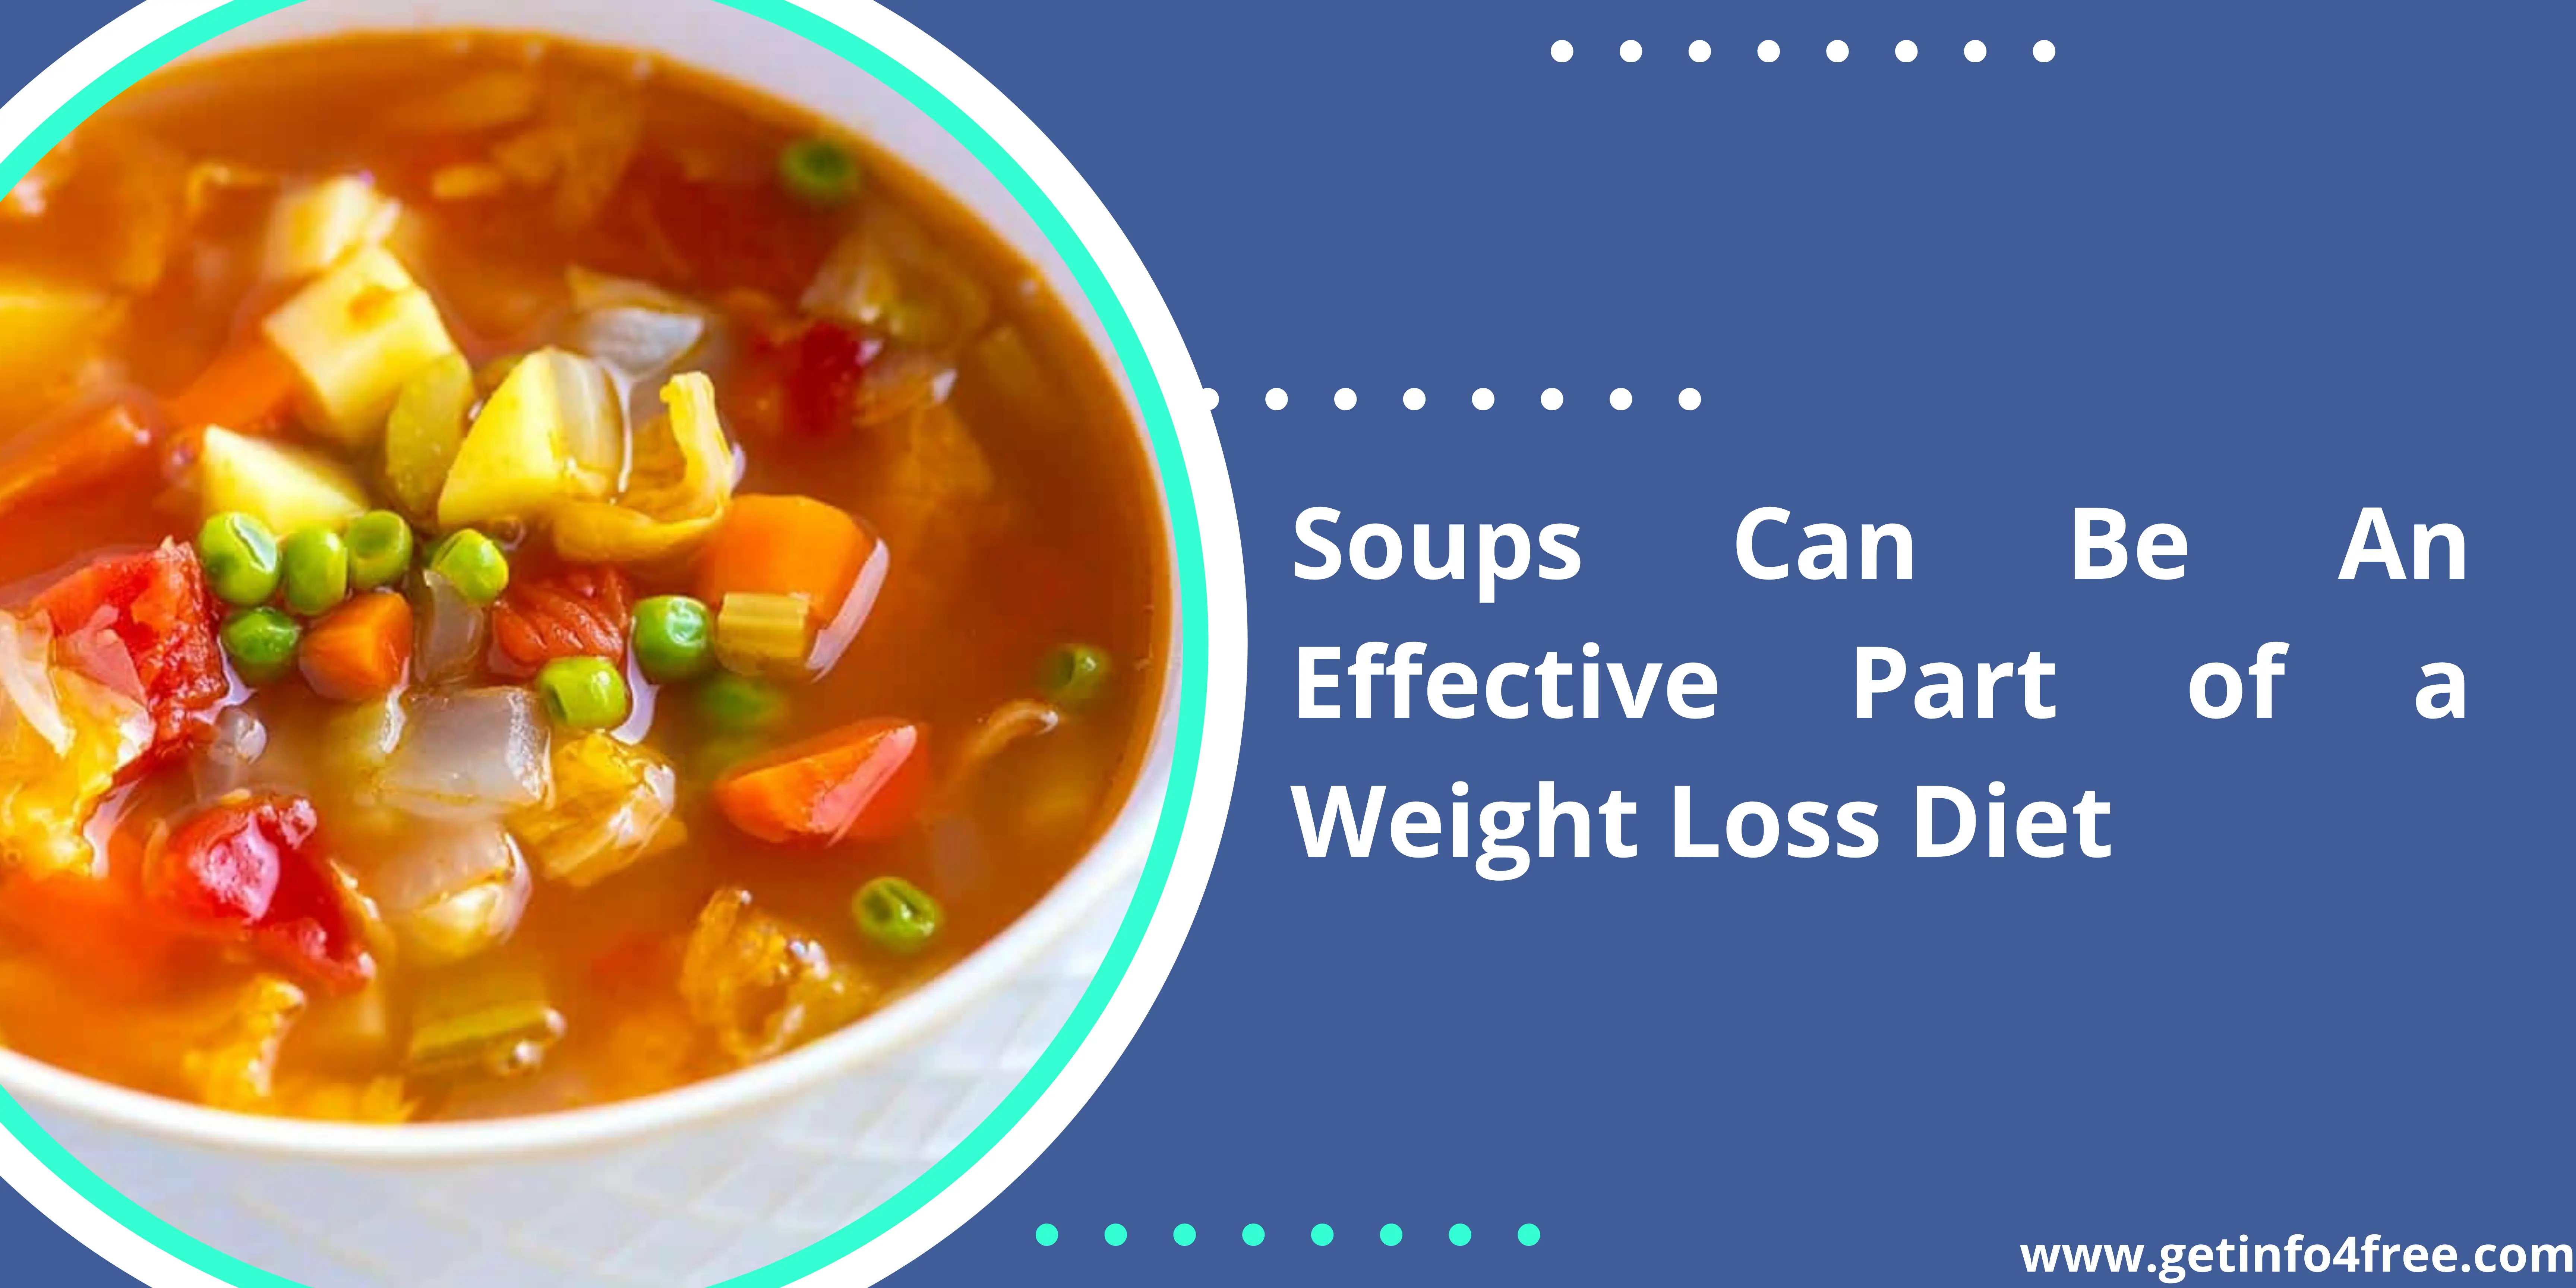 Soups Can Be An Effective Part of a Weight Loss Diet